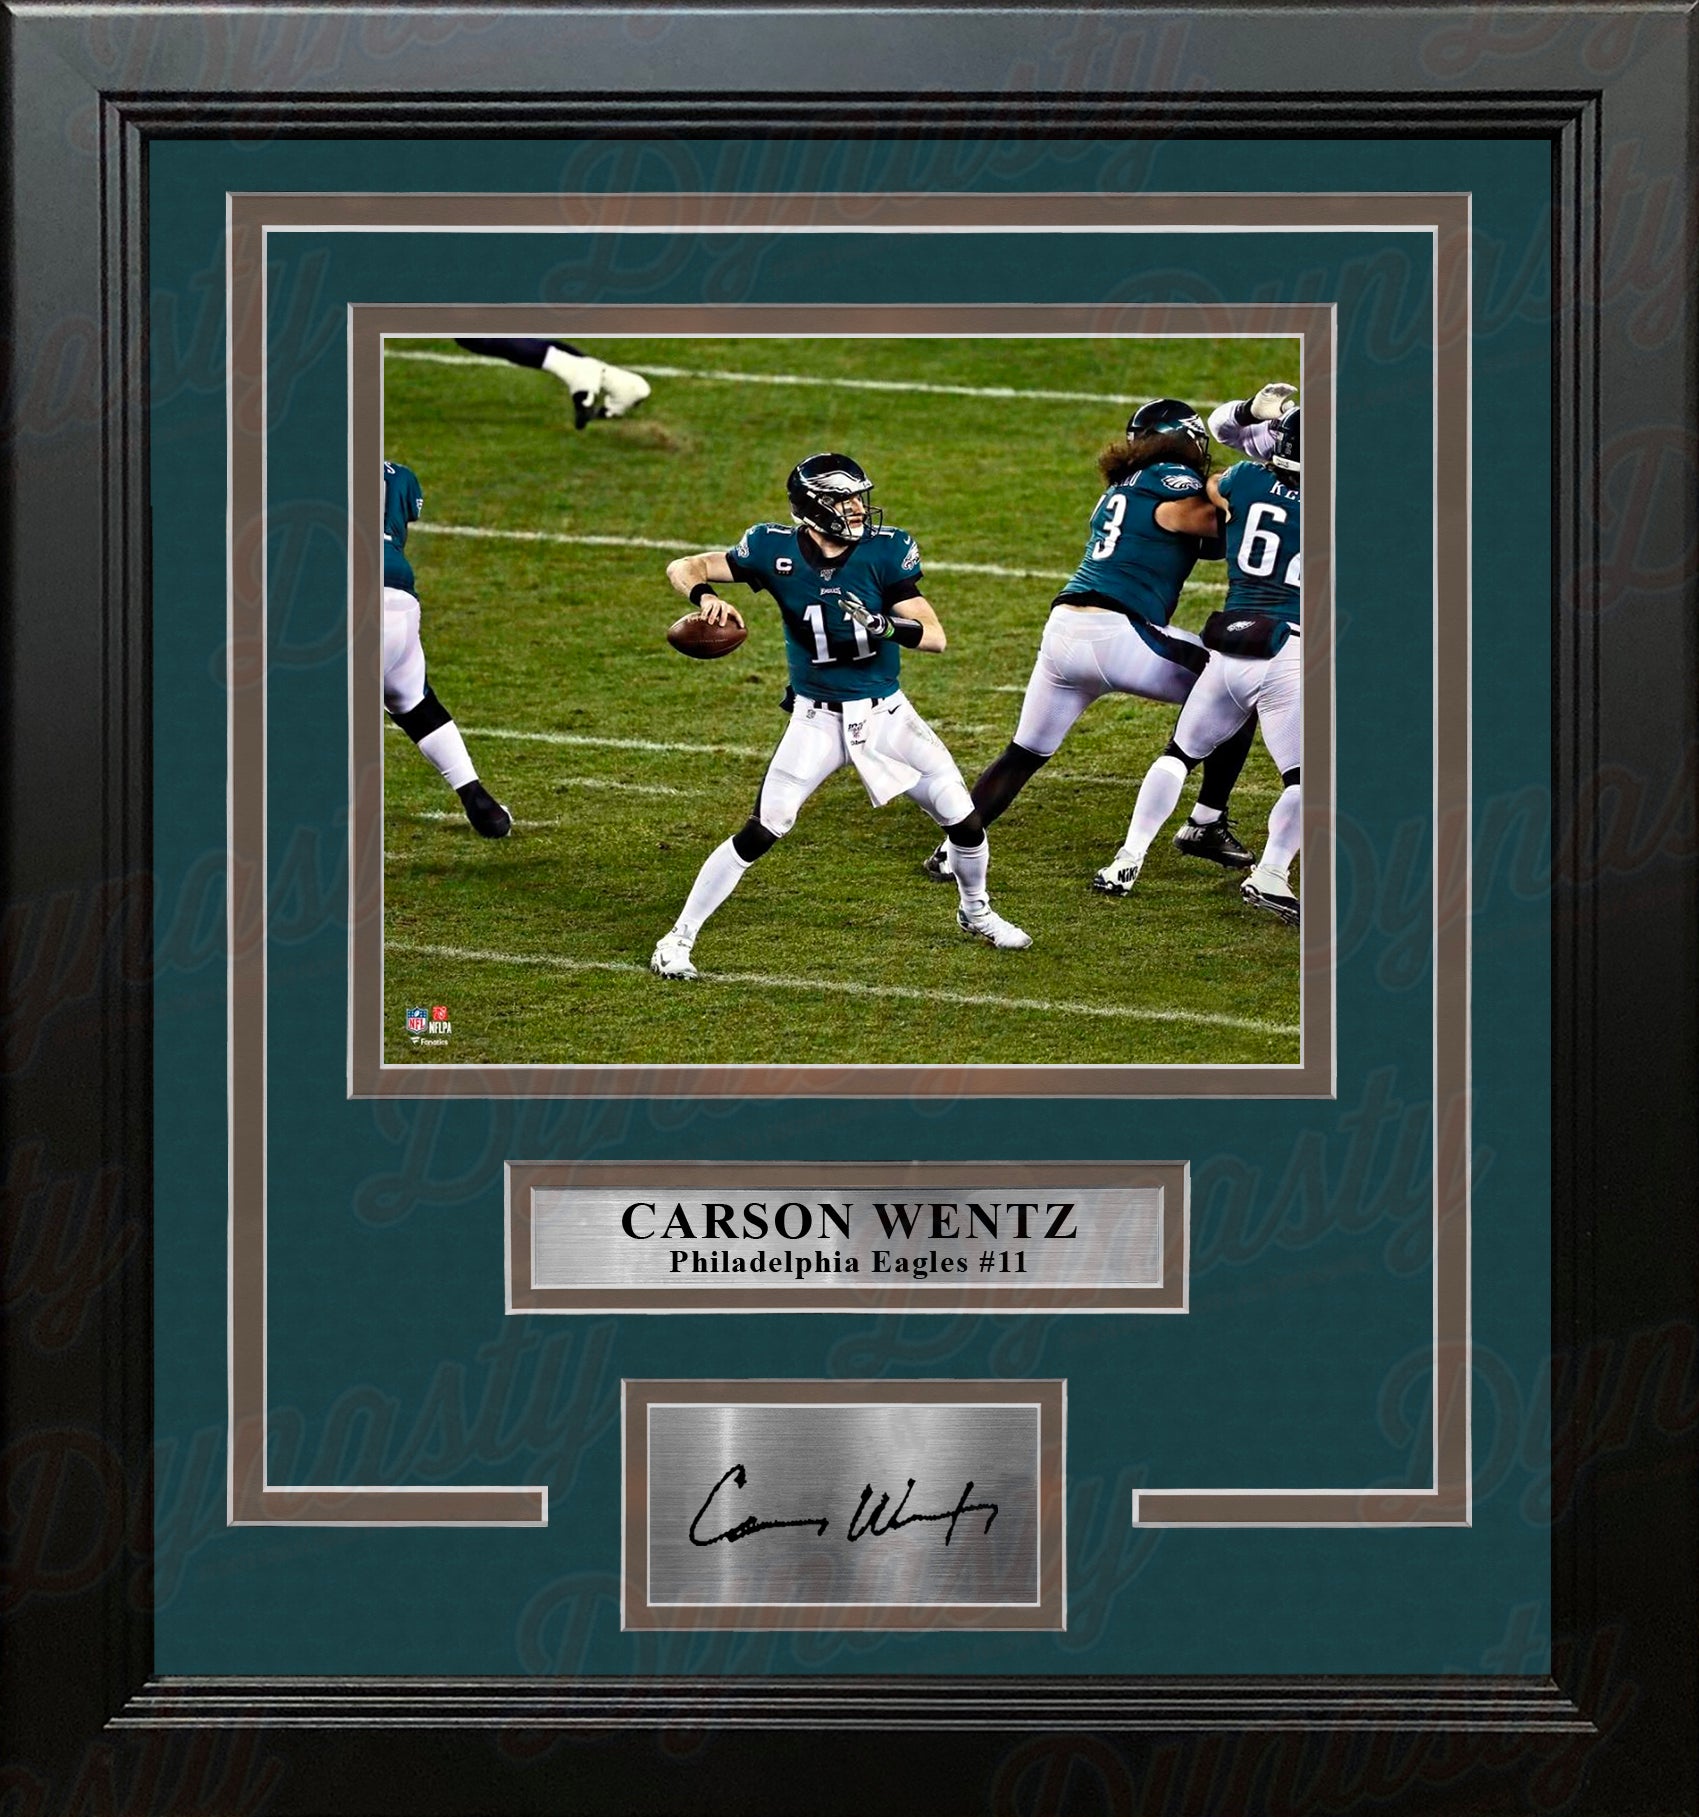 Carson Wentz in Action Philadelphia Eagles 8" x 10" Framed Football Photo with Engraved Autograph - Dynasty Sports & Framing 